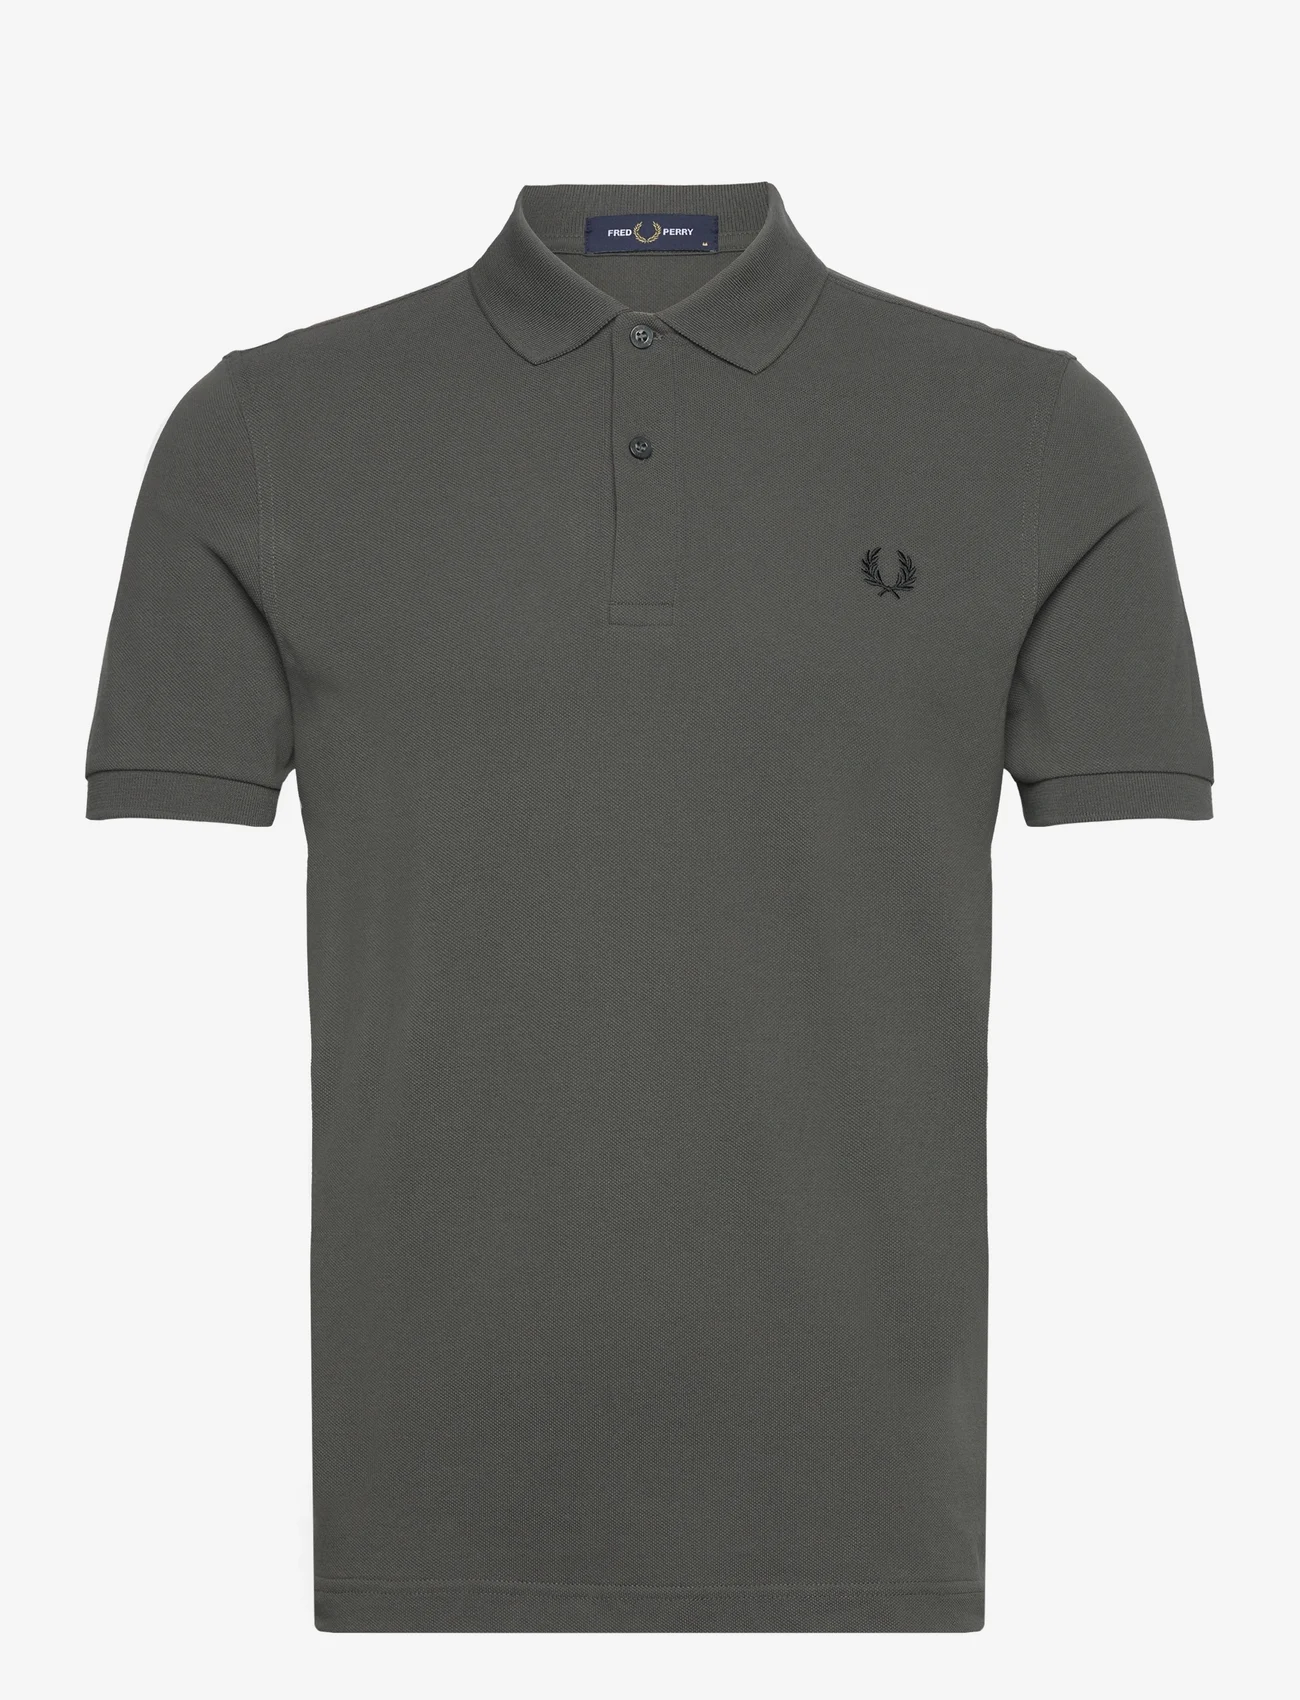 Fred Perry - PLAIN FRED PERRY SHIRT - short-sleeved polos - field green - 0